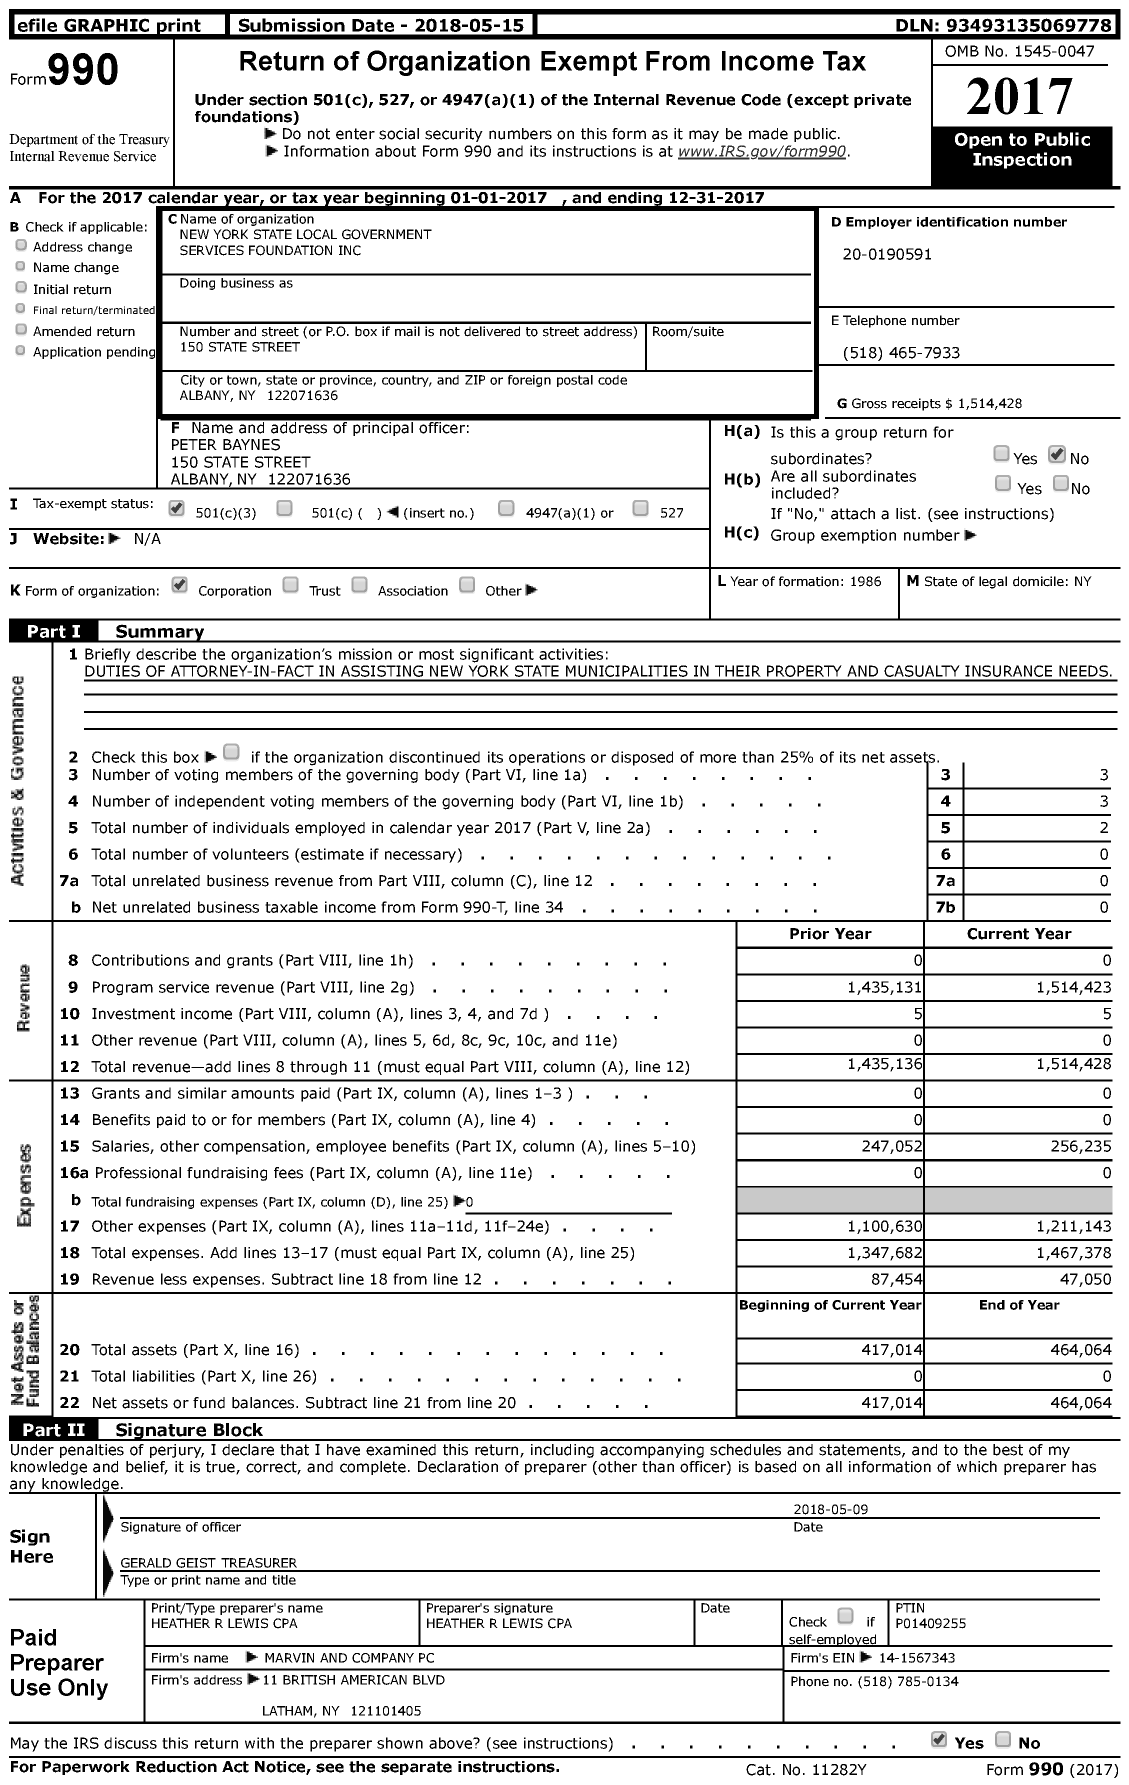 Image of first page of 2017 Form 990 for New York State Local Government Services Foundation